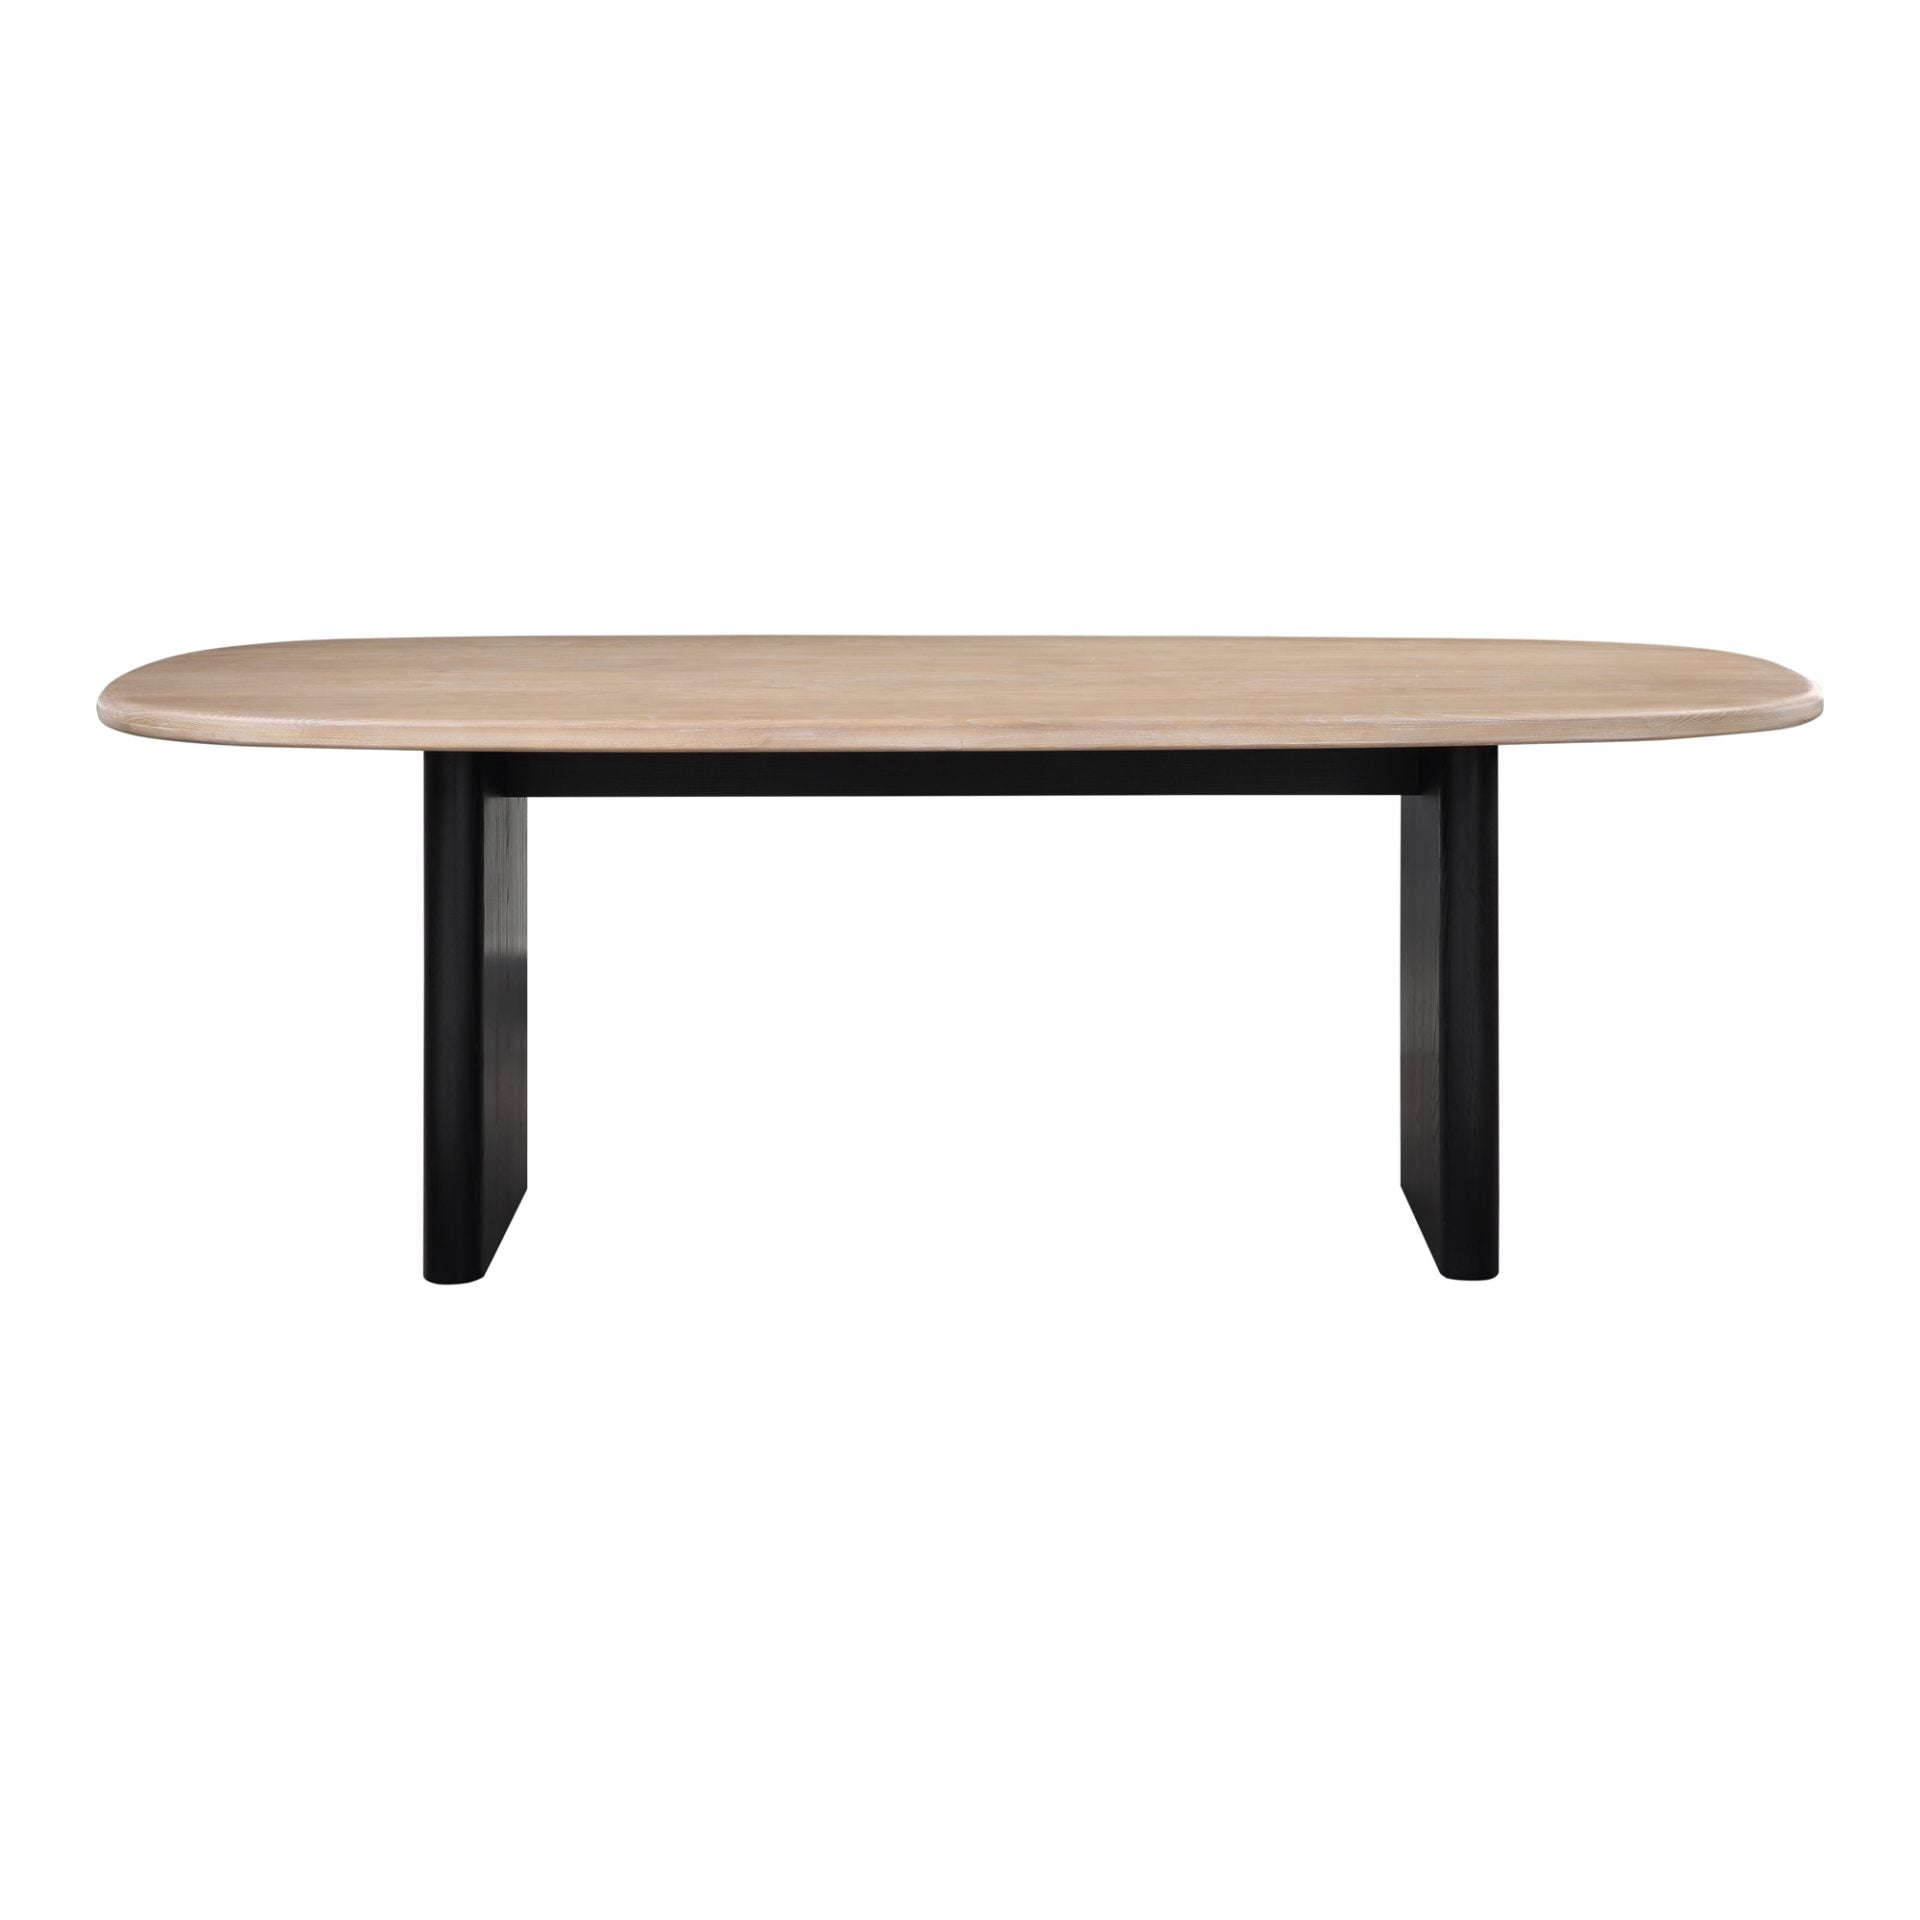 Made from solid Ash wood, this naturally finished Sakurai Dining Table has a black base giving it a contemporary look. An amazing choice to modernize your dining room.   Size: 88"W x 42"D x 30"H